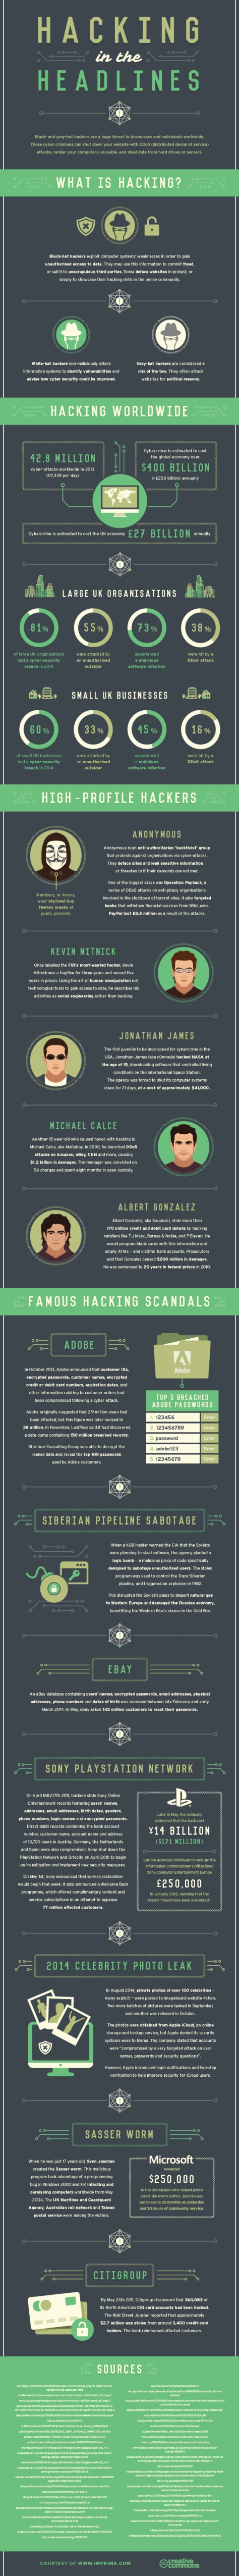 Infographic-hacking-in-the-headlines